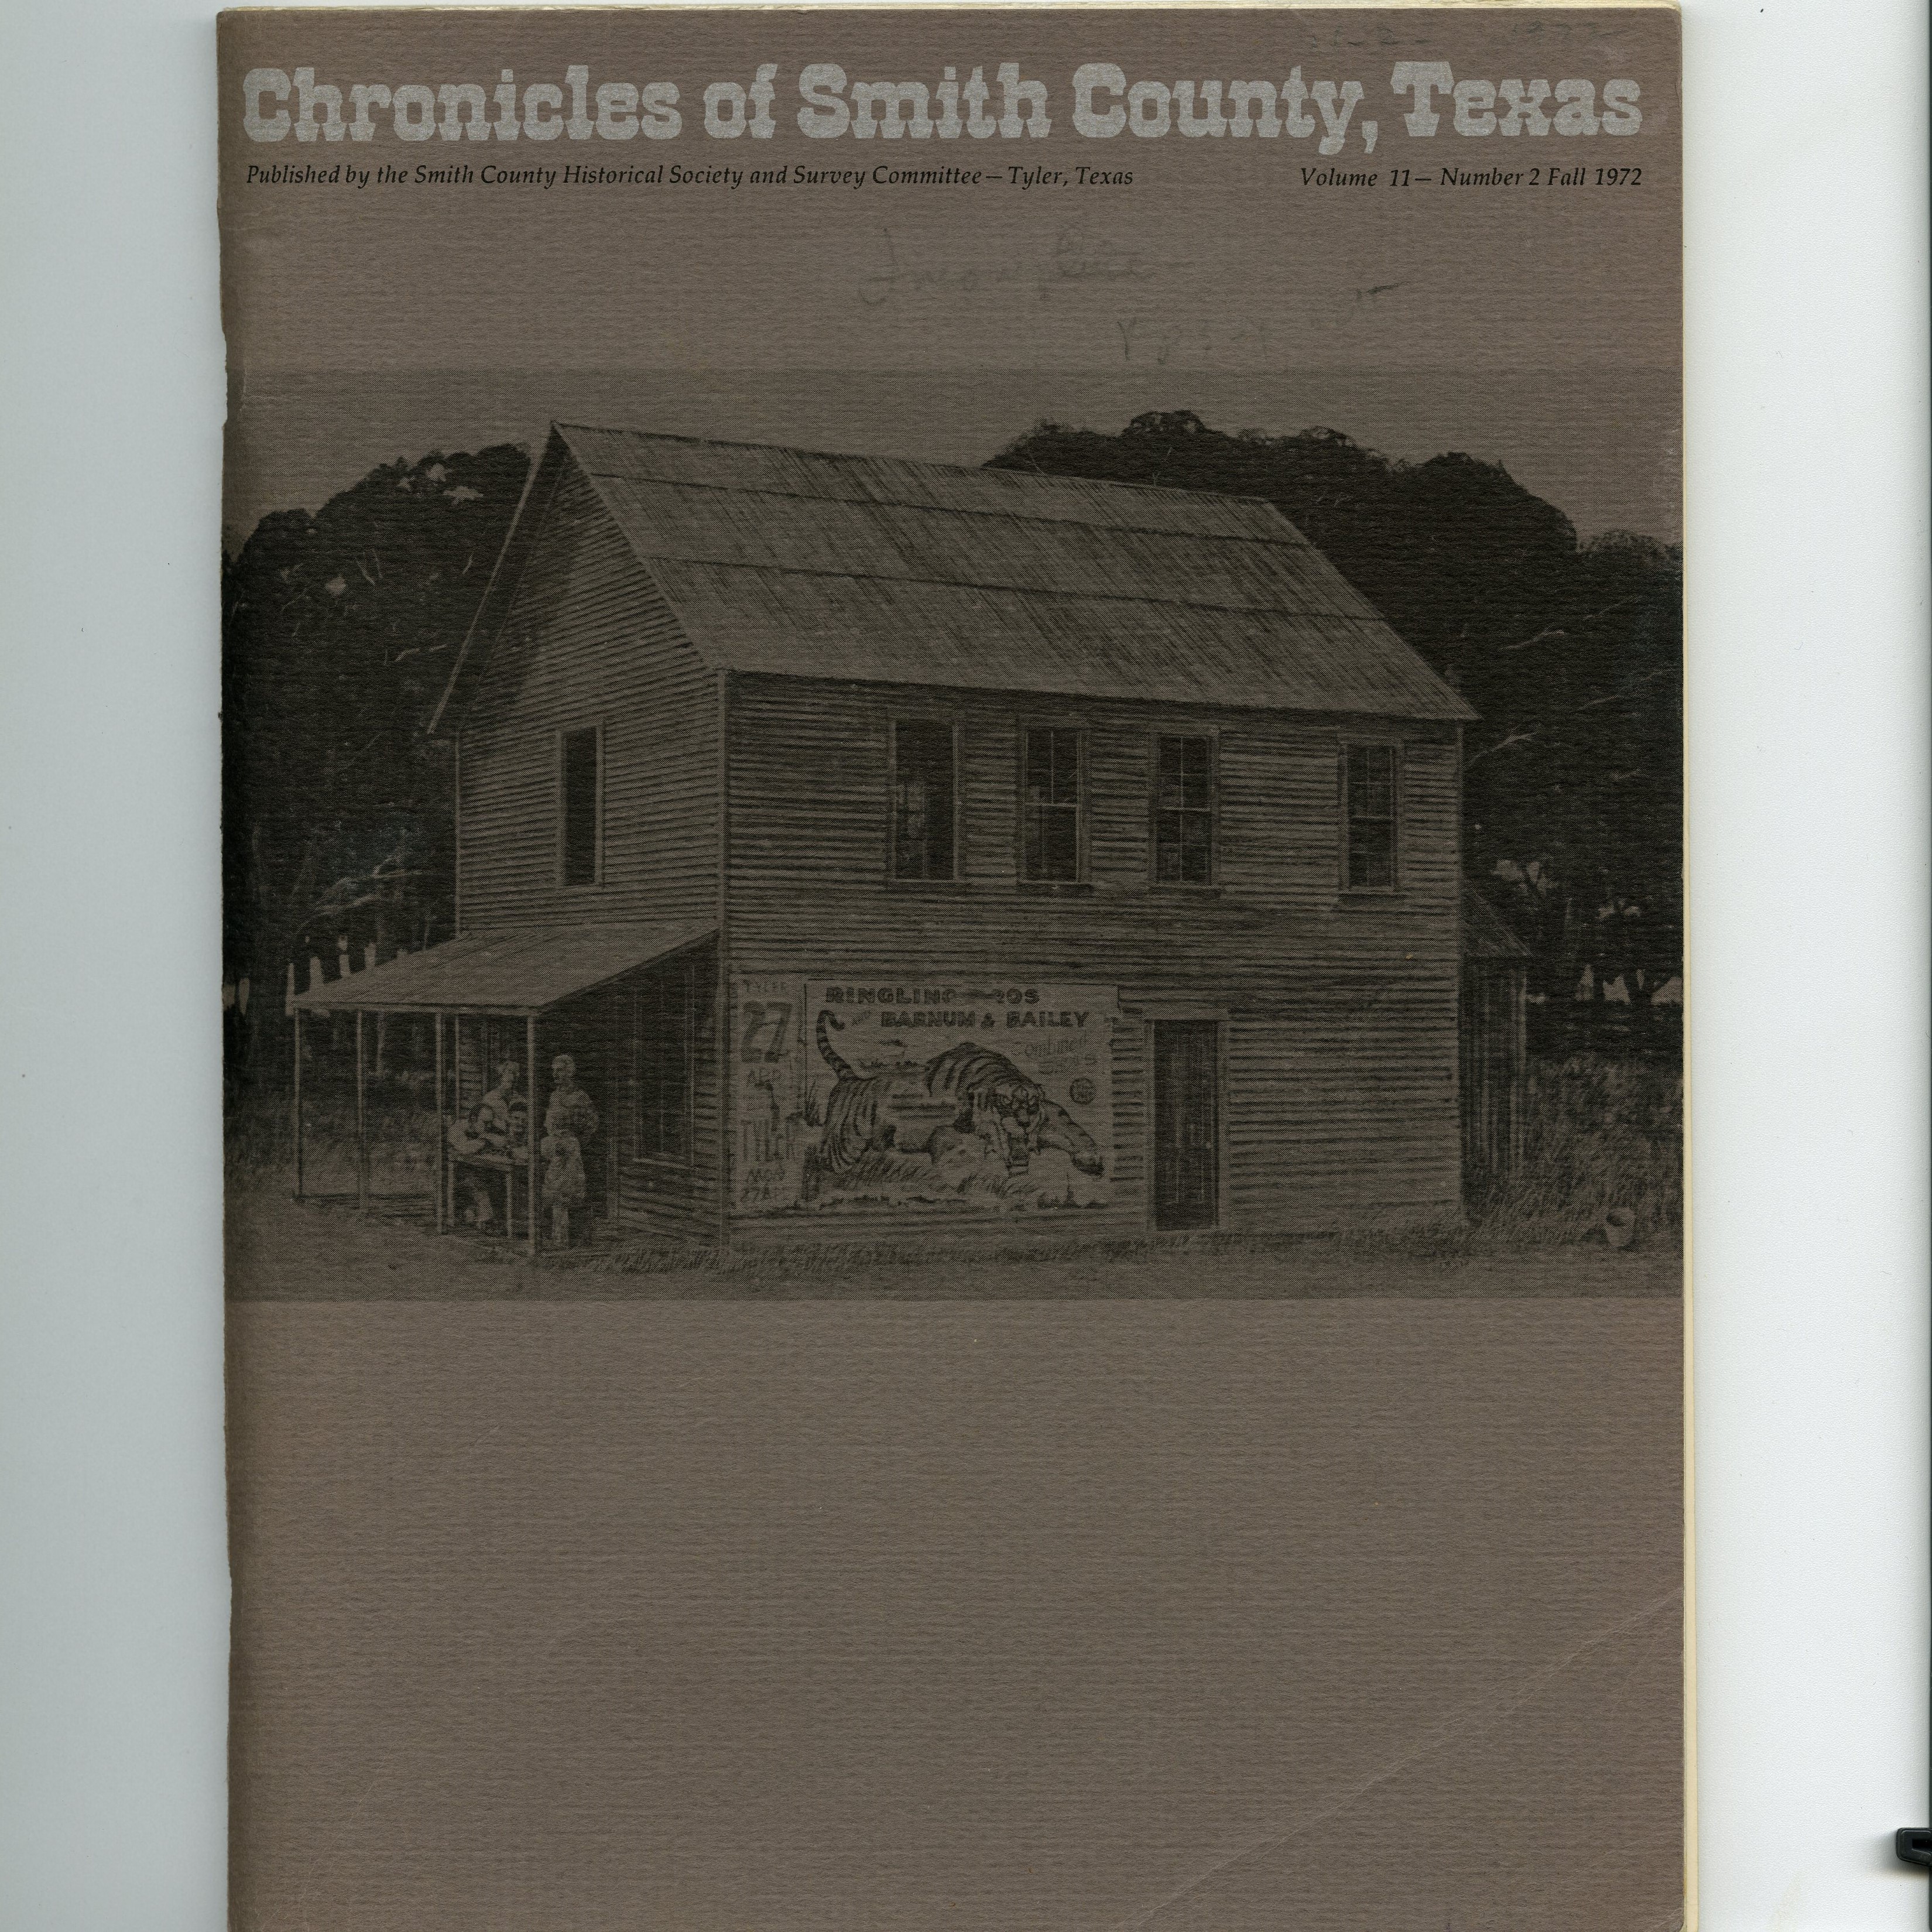 Chronicles of Smith County, Texas, Volume 11 Issue 2, Fall 1972